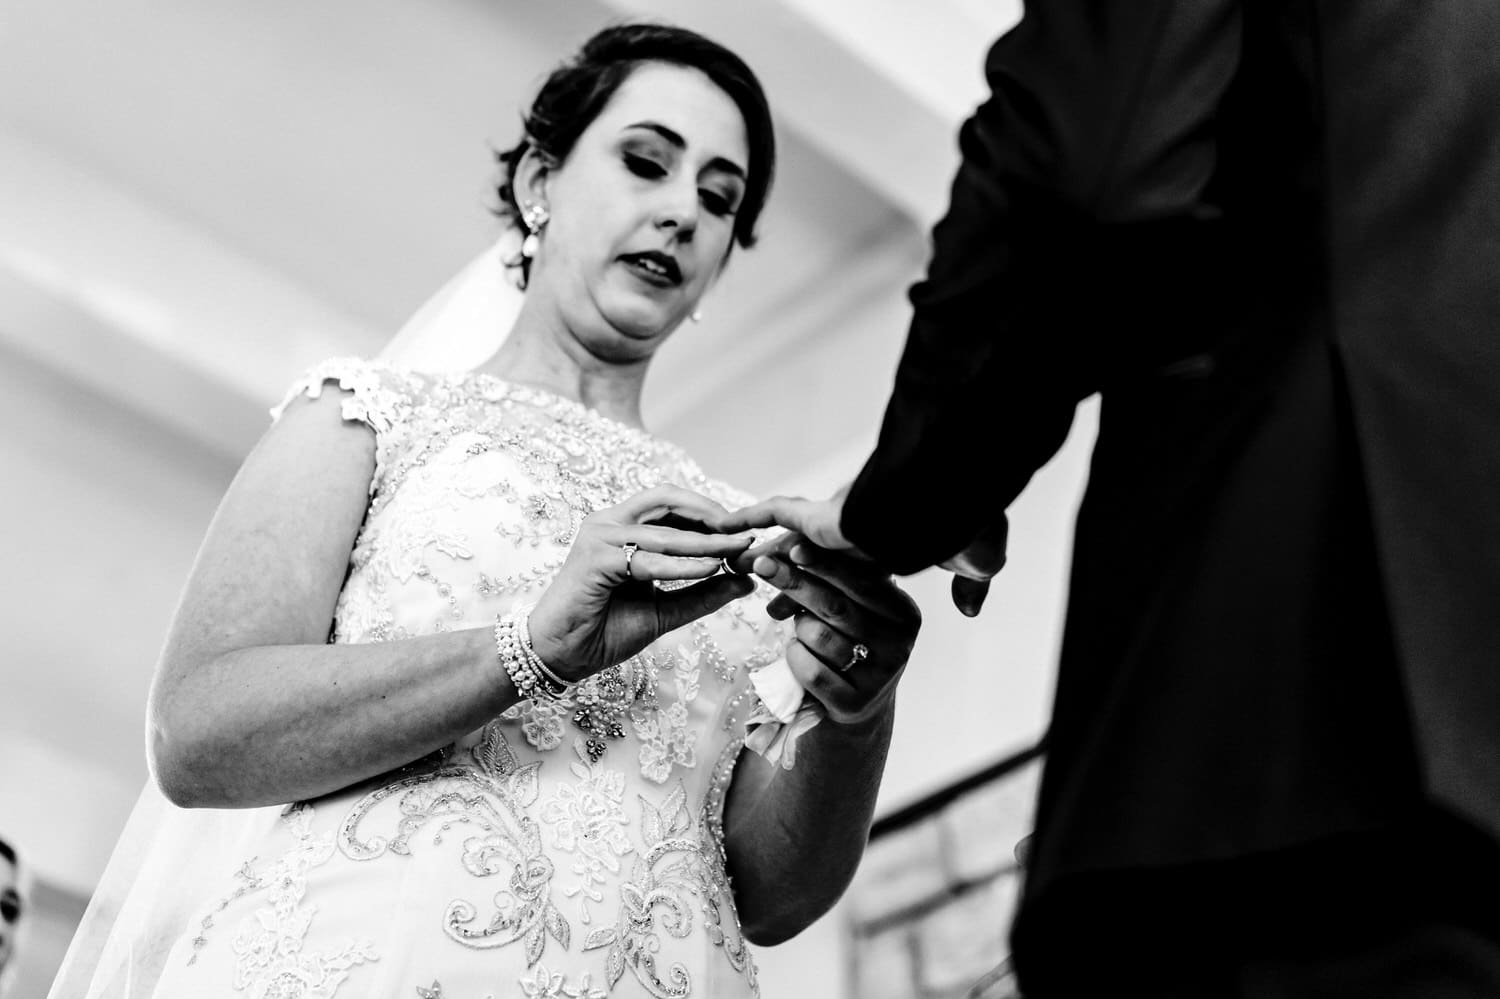 A candid black and white picture taken from the ground looking up of a bride putting a wedding band on her grooms' hand during their wedding ceremony at The Elms. 